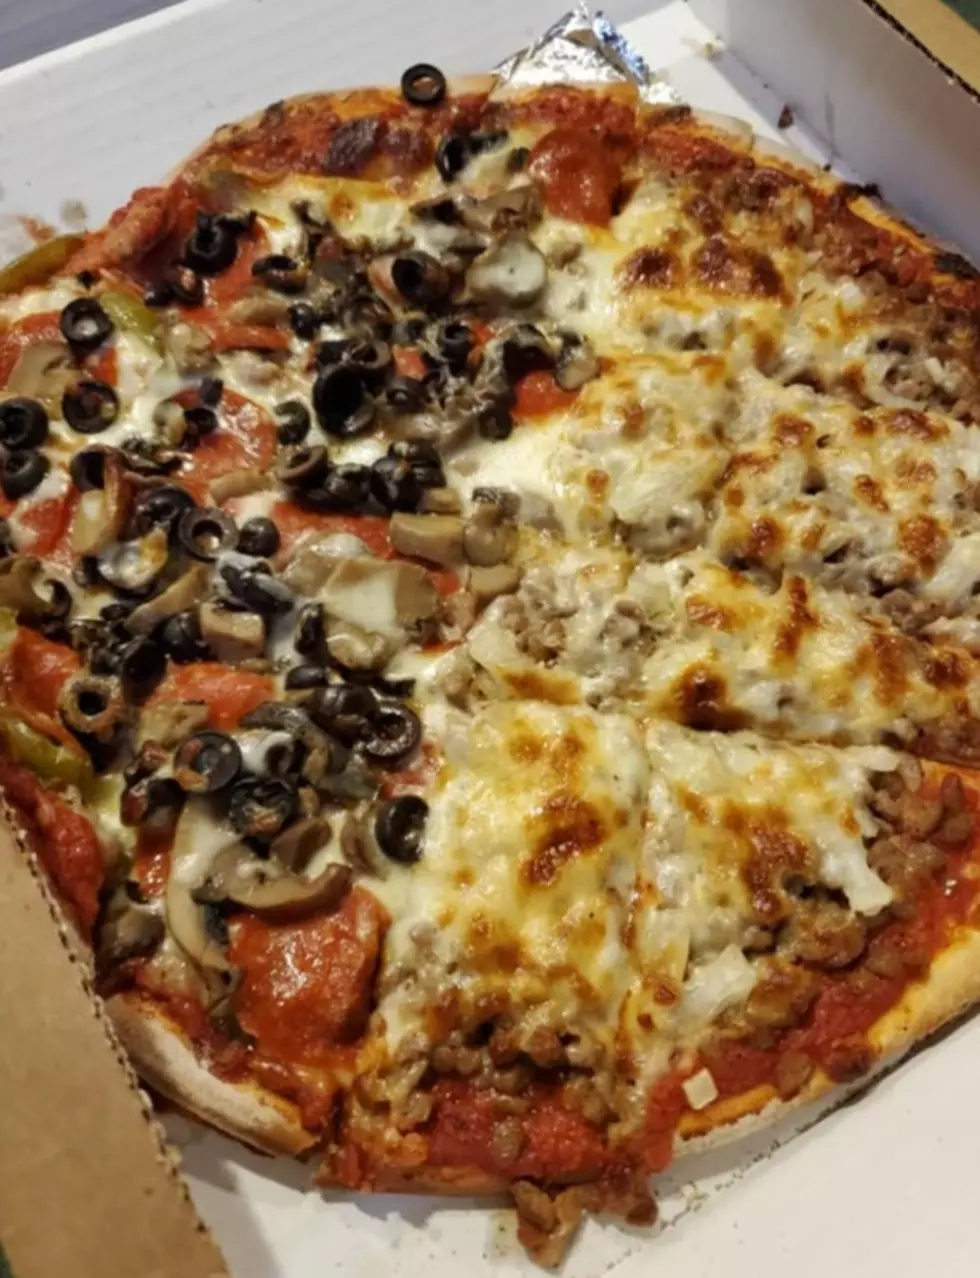 Illinois’ ‘Best Hole-in-the-Wall Pizza Joint’ Revealed And It’s Not In Chicago